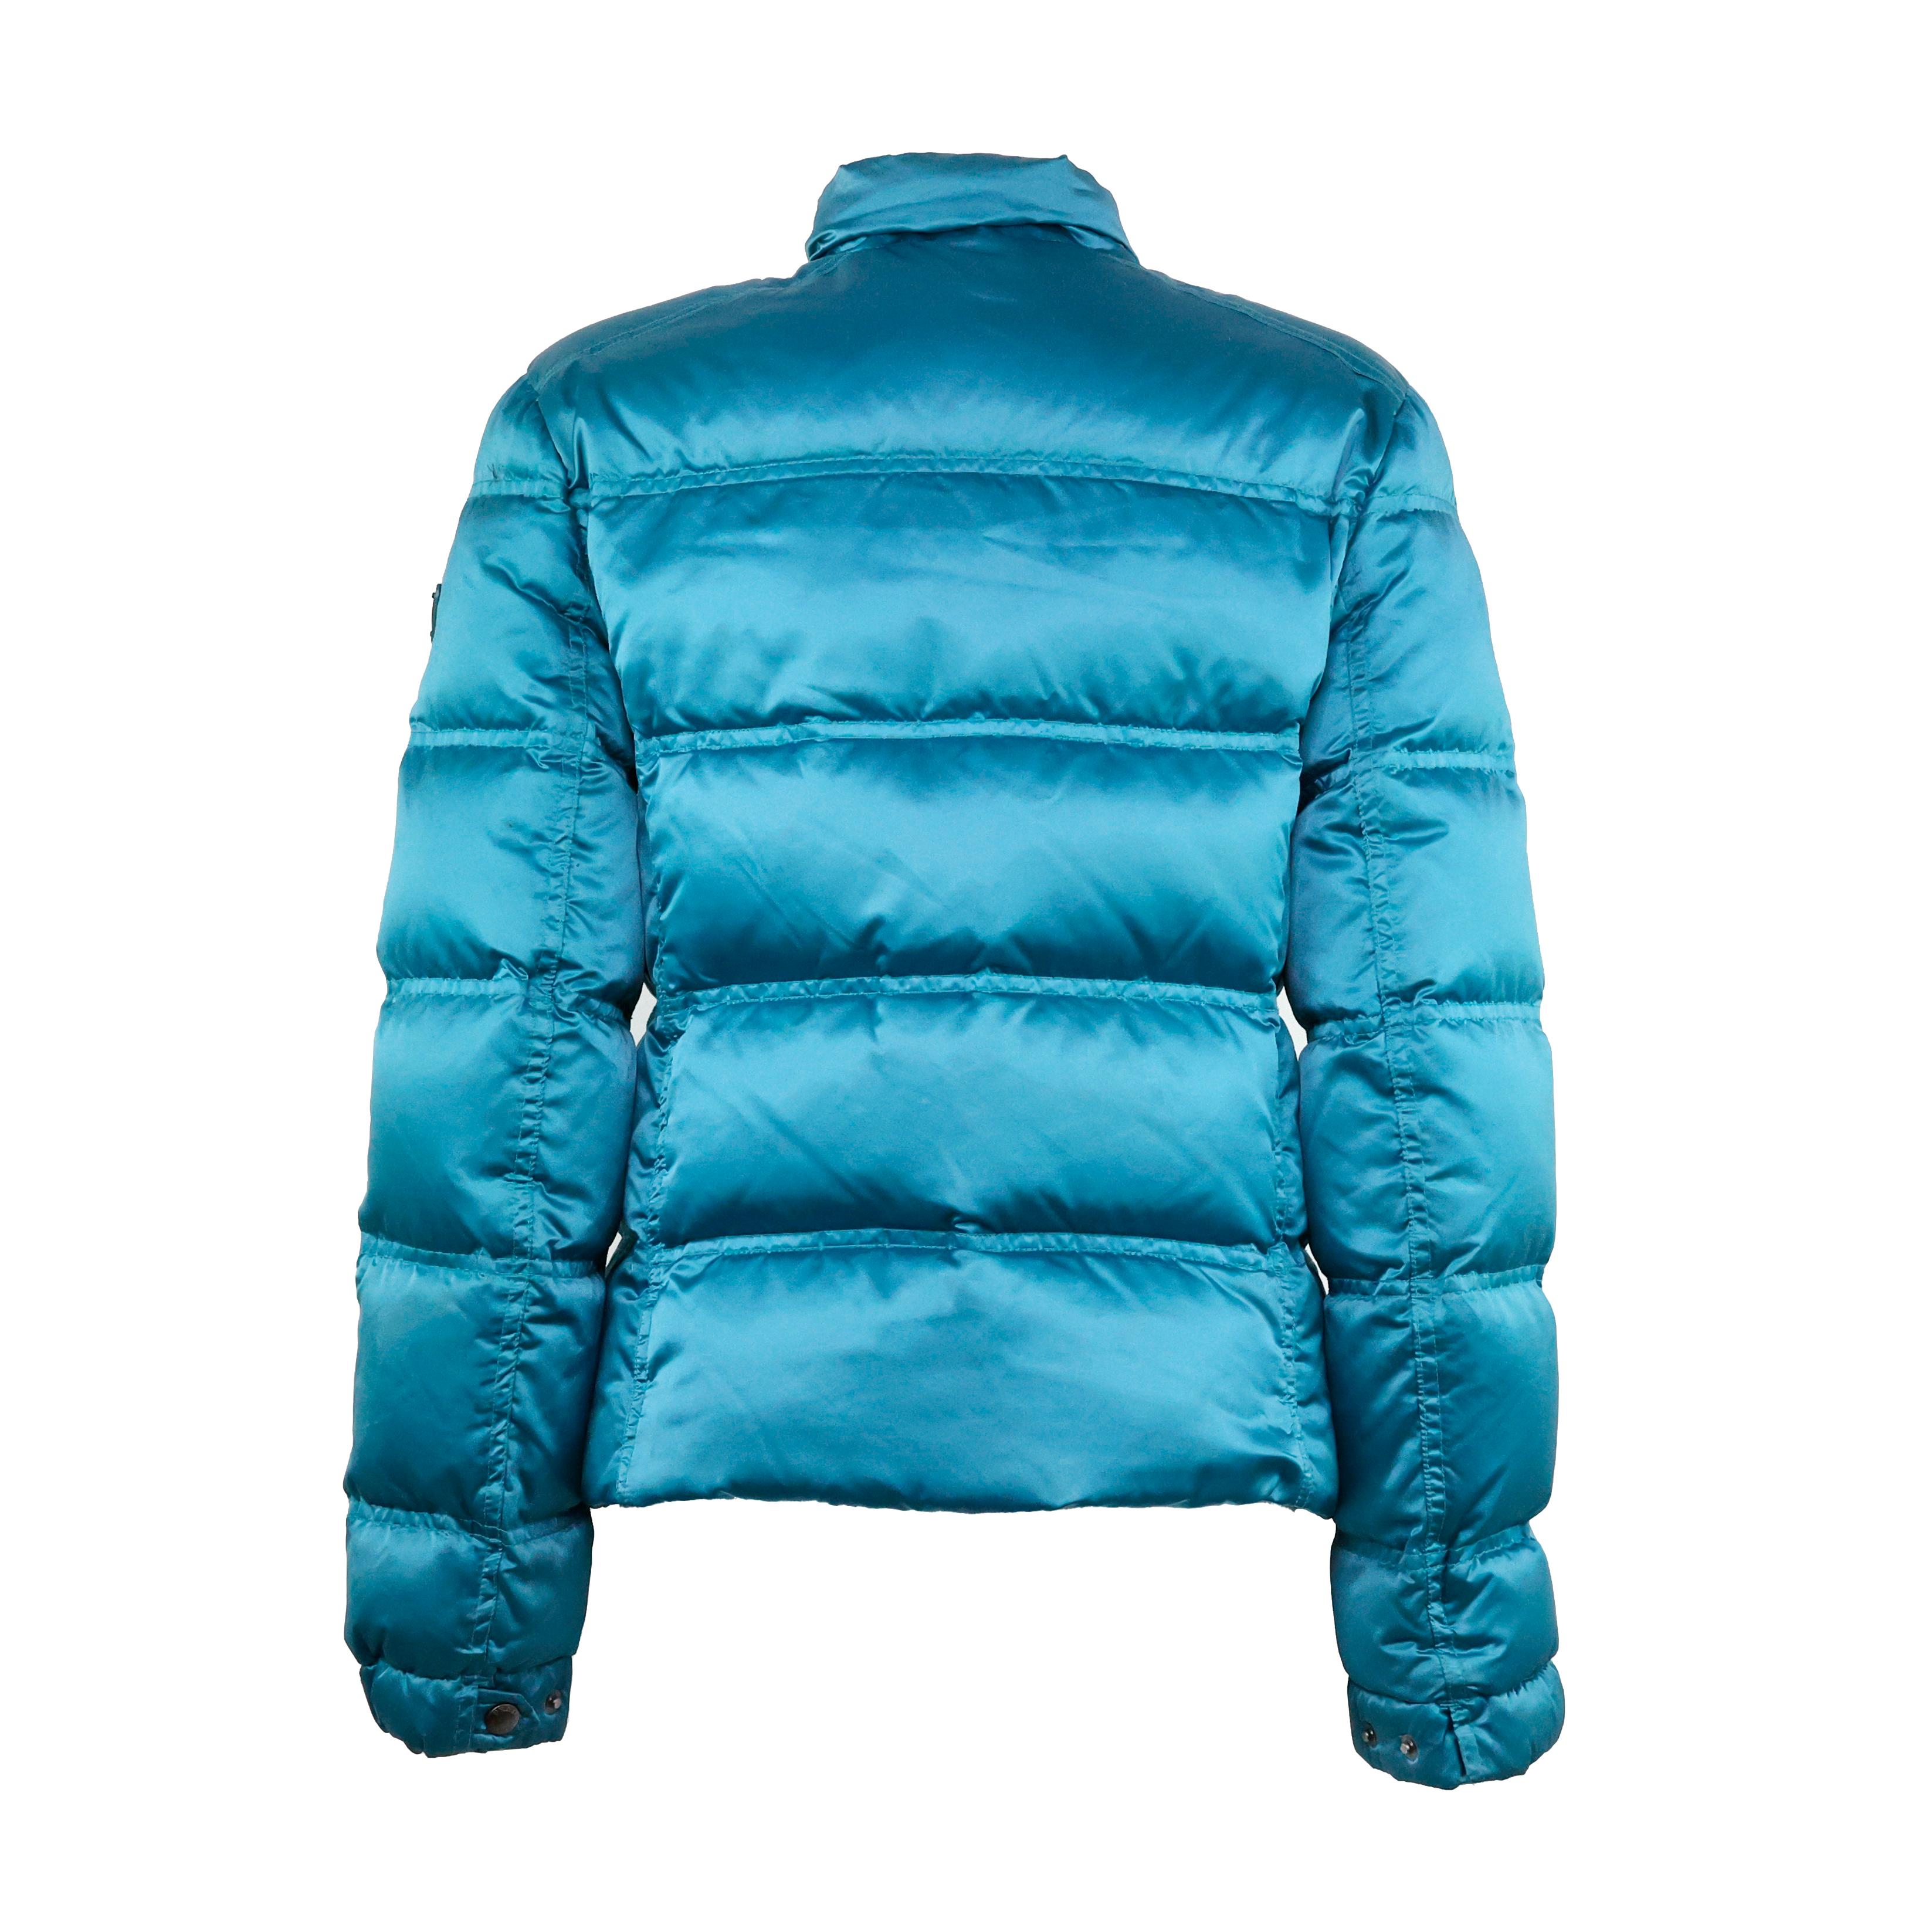 Prada puffer jacket in satin and goose down color turquoise, with removable hood. Size 40 IT.

Condition:
Really good.

Packing/accessories:
Hanger, extra replacement buttons.